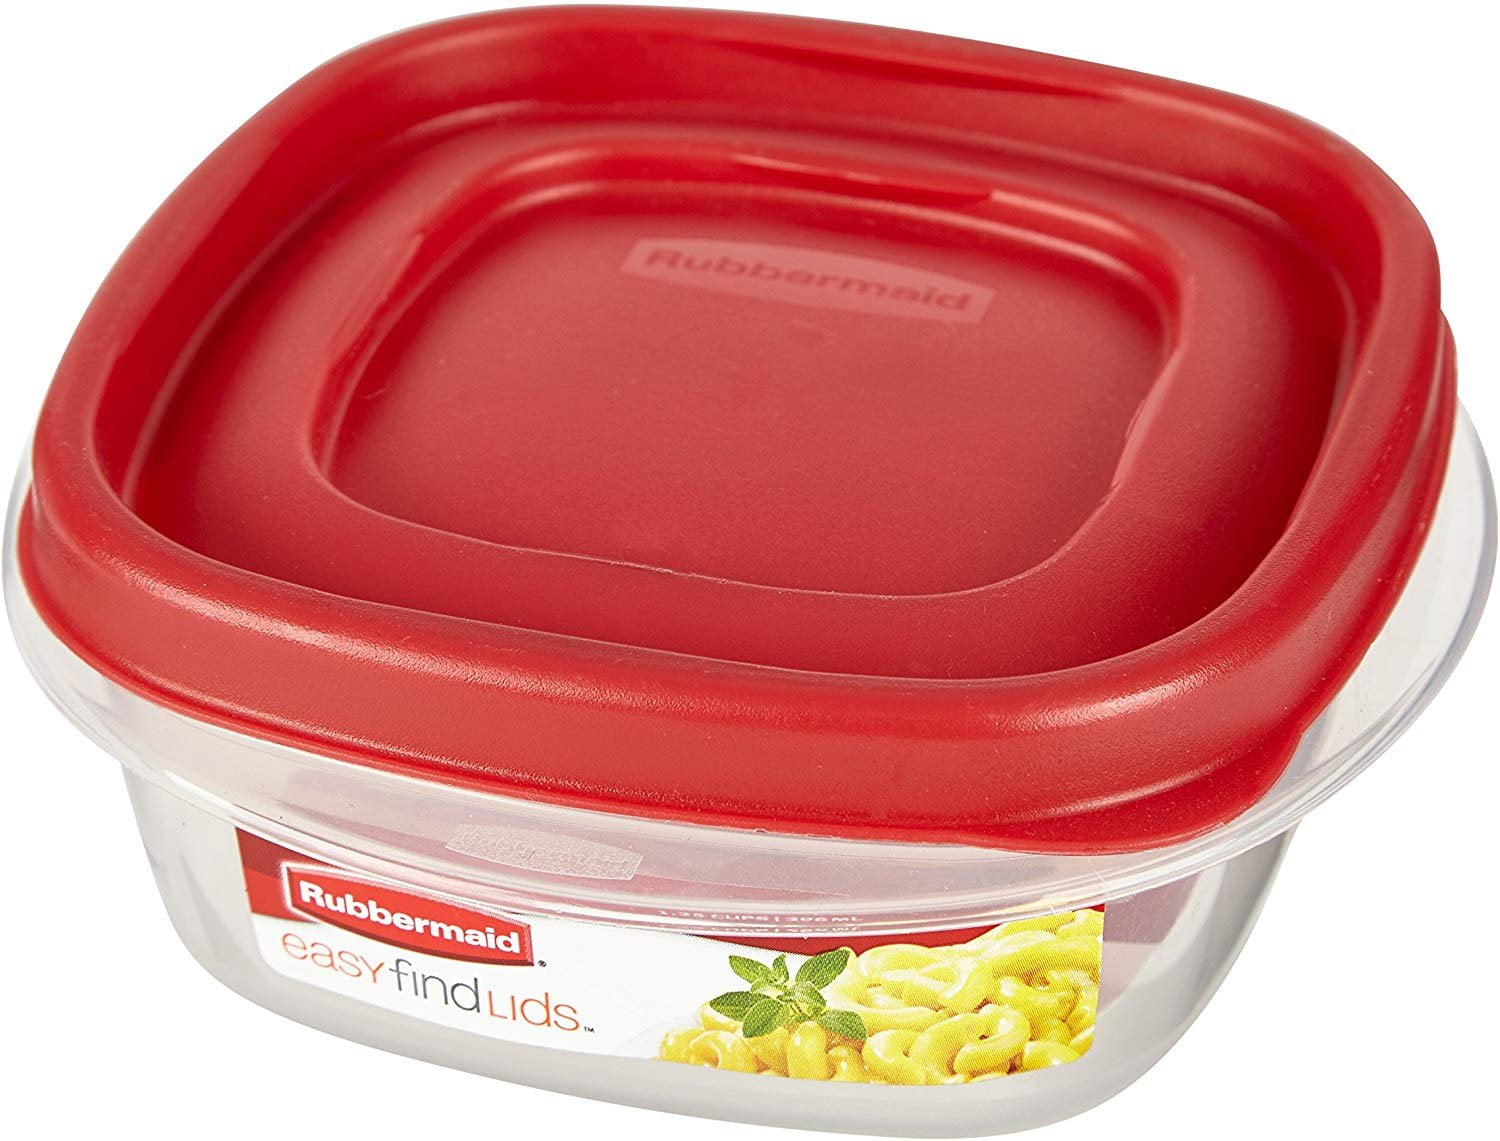 Rubbermaid Easy Find Replacement 7J64 Red Lid 6 1/2 Food Container Clean!  Tight